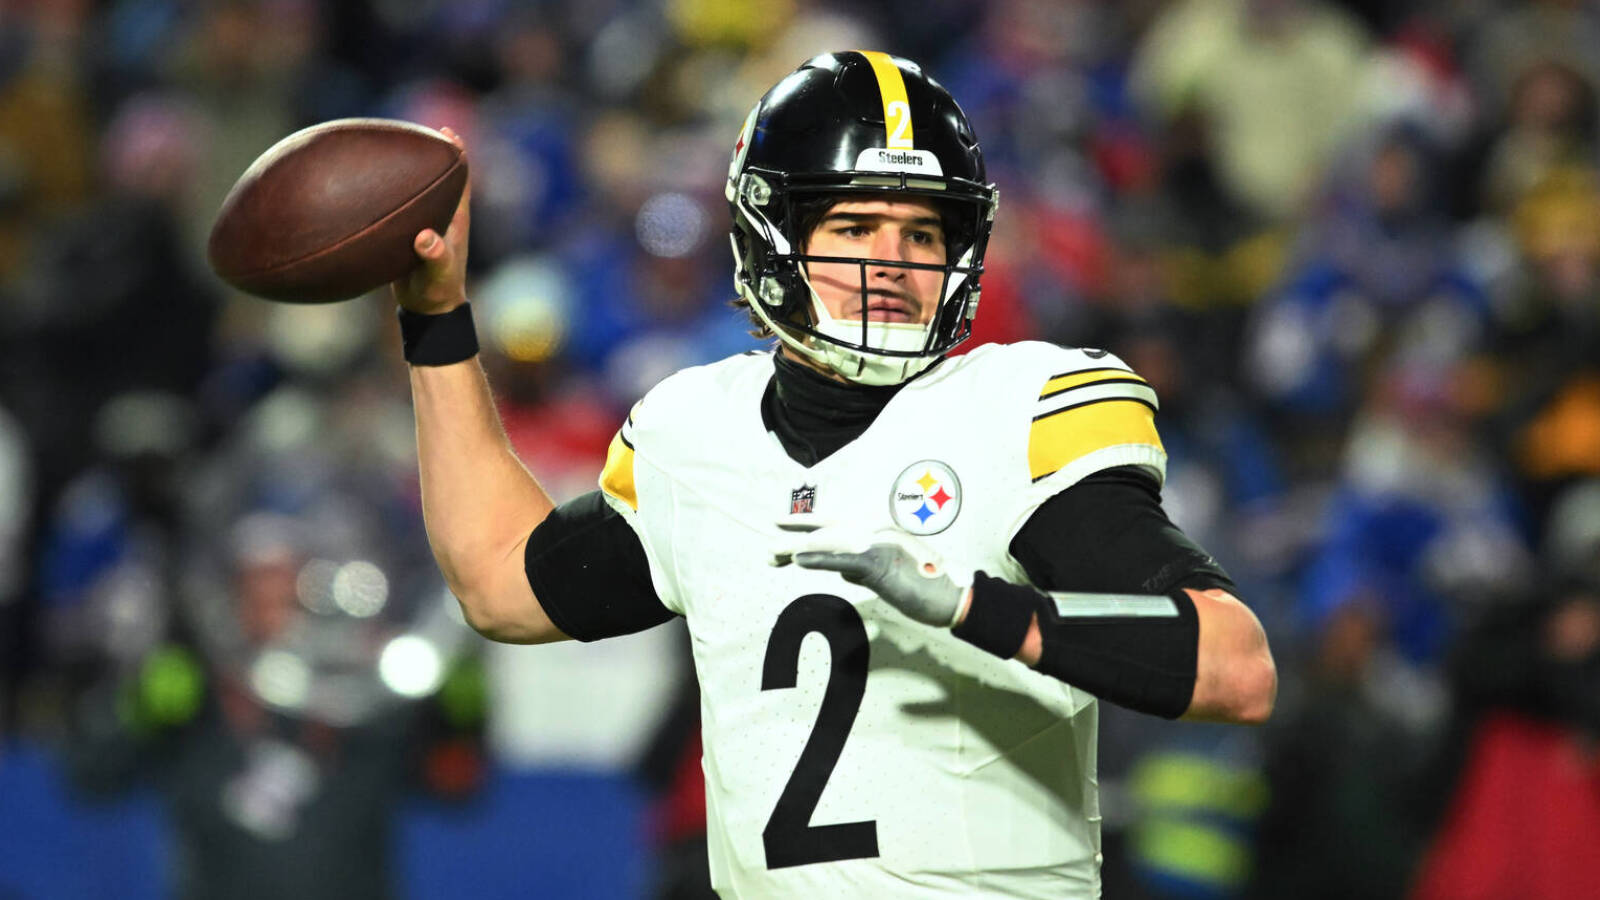 Reporter: Quarterback's future with Steelers 'up in the air'